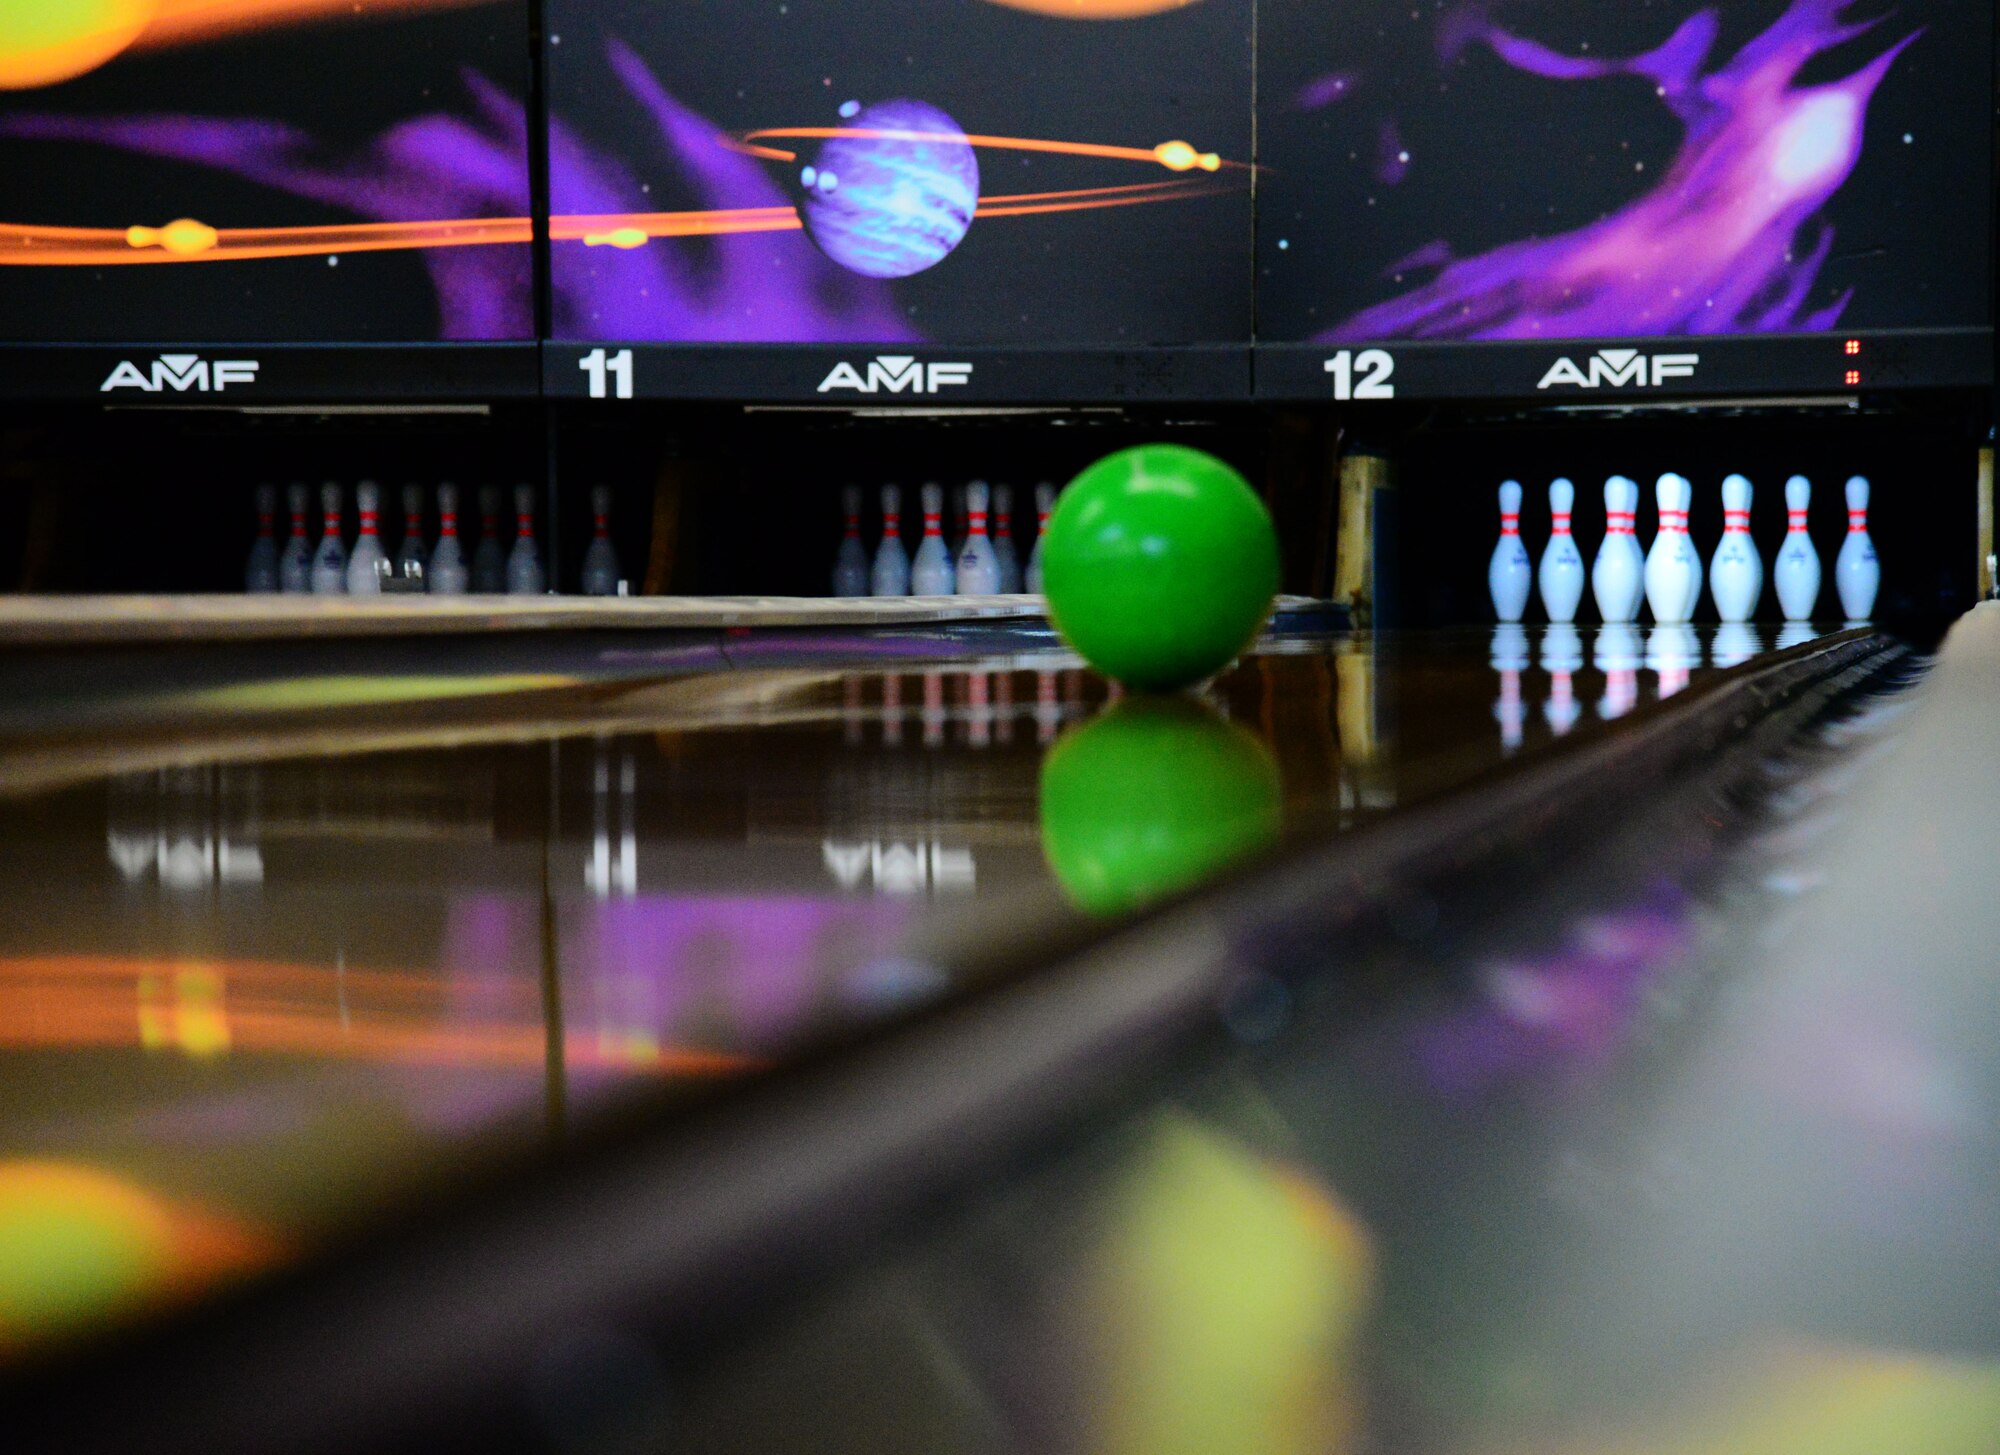 Malmstrom Air Force Base, Mont., is home to the 341st Missile Wing and the Aces High Bowling Center. With an impressive, twelve-lane facility, this location is ideal for Airmen to kick-back, relax and build camaraderie within the force. The facility also includes a snack bar which is a popular eatery among Malmstrom AFB personnel. A large room is available to host unit or wing functions for large groups. The bowling center has multiple capabilities to support the wing’s priority of supporting Airmen and their families, making it the perfect location for Malmstrom team members to enjoy a game together. For more information, call 731-2695. (U.S. Air Force photo/Airman 1st Class Magen M. Reeves)